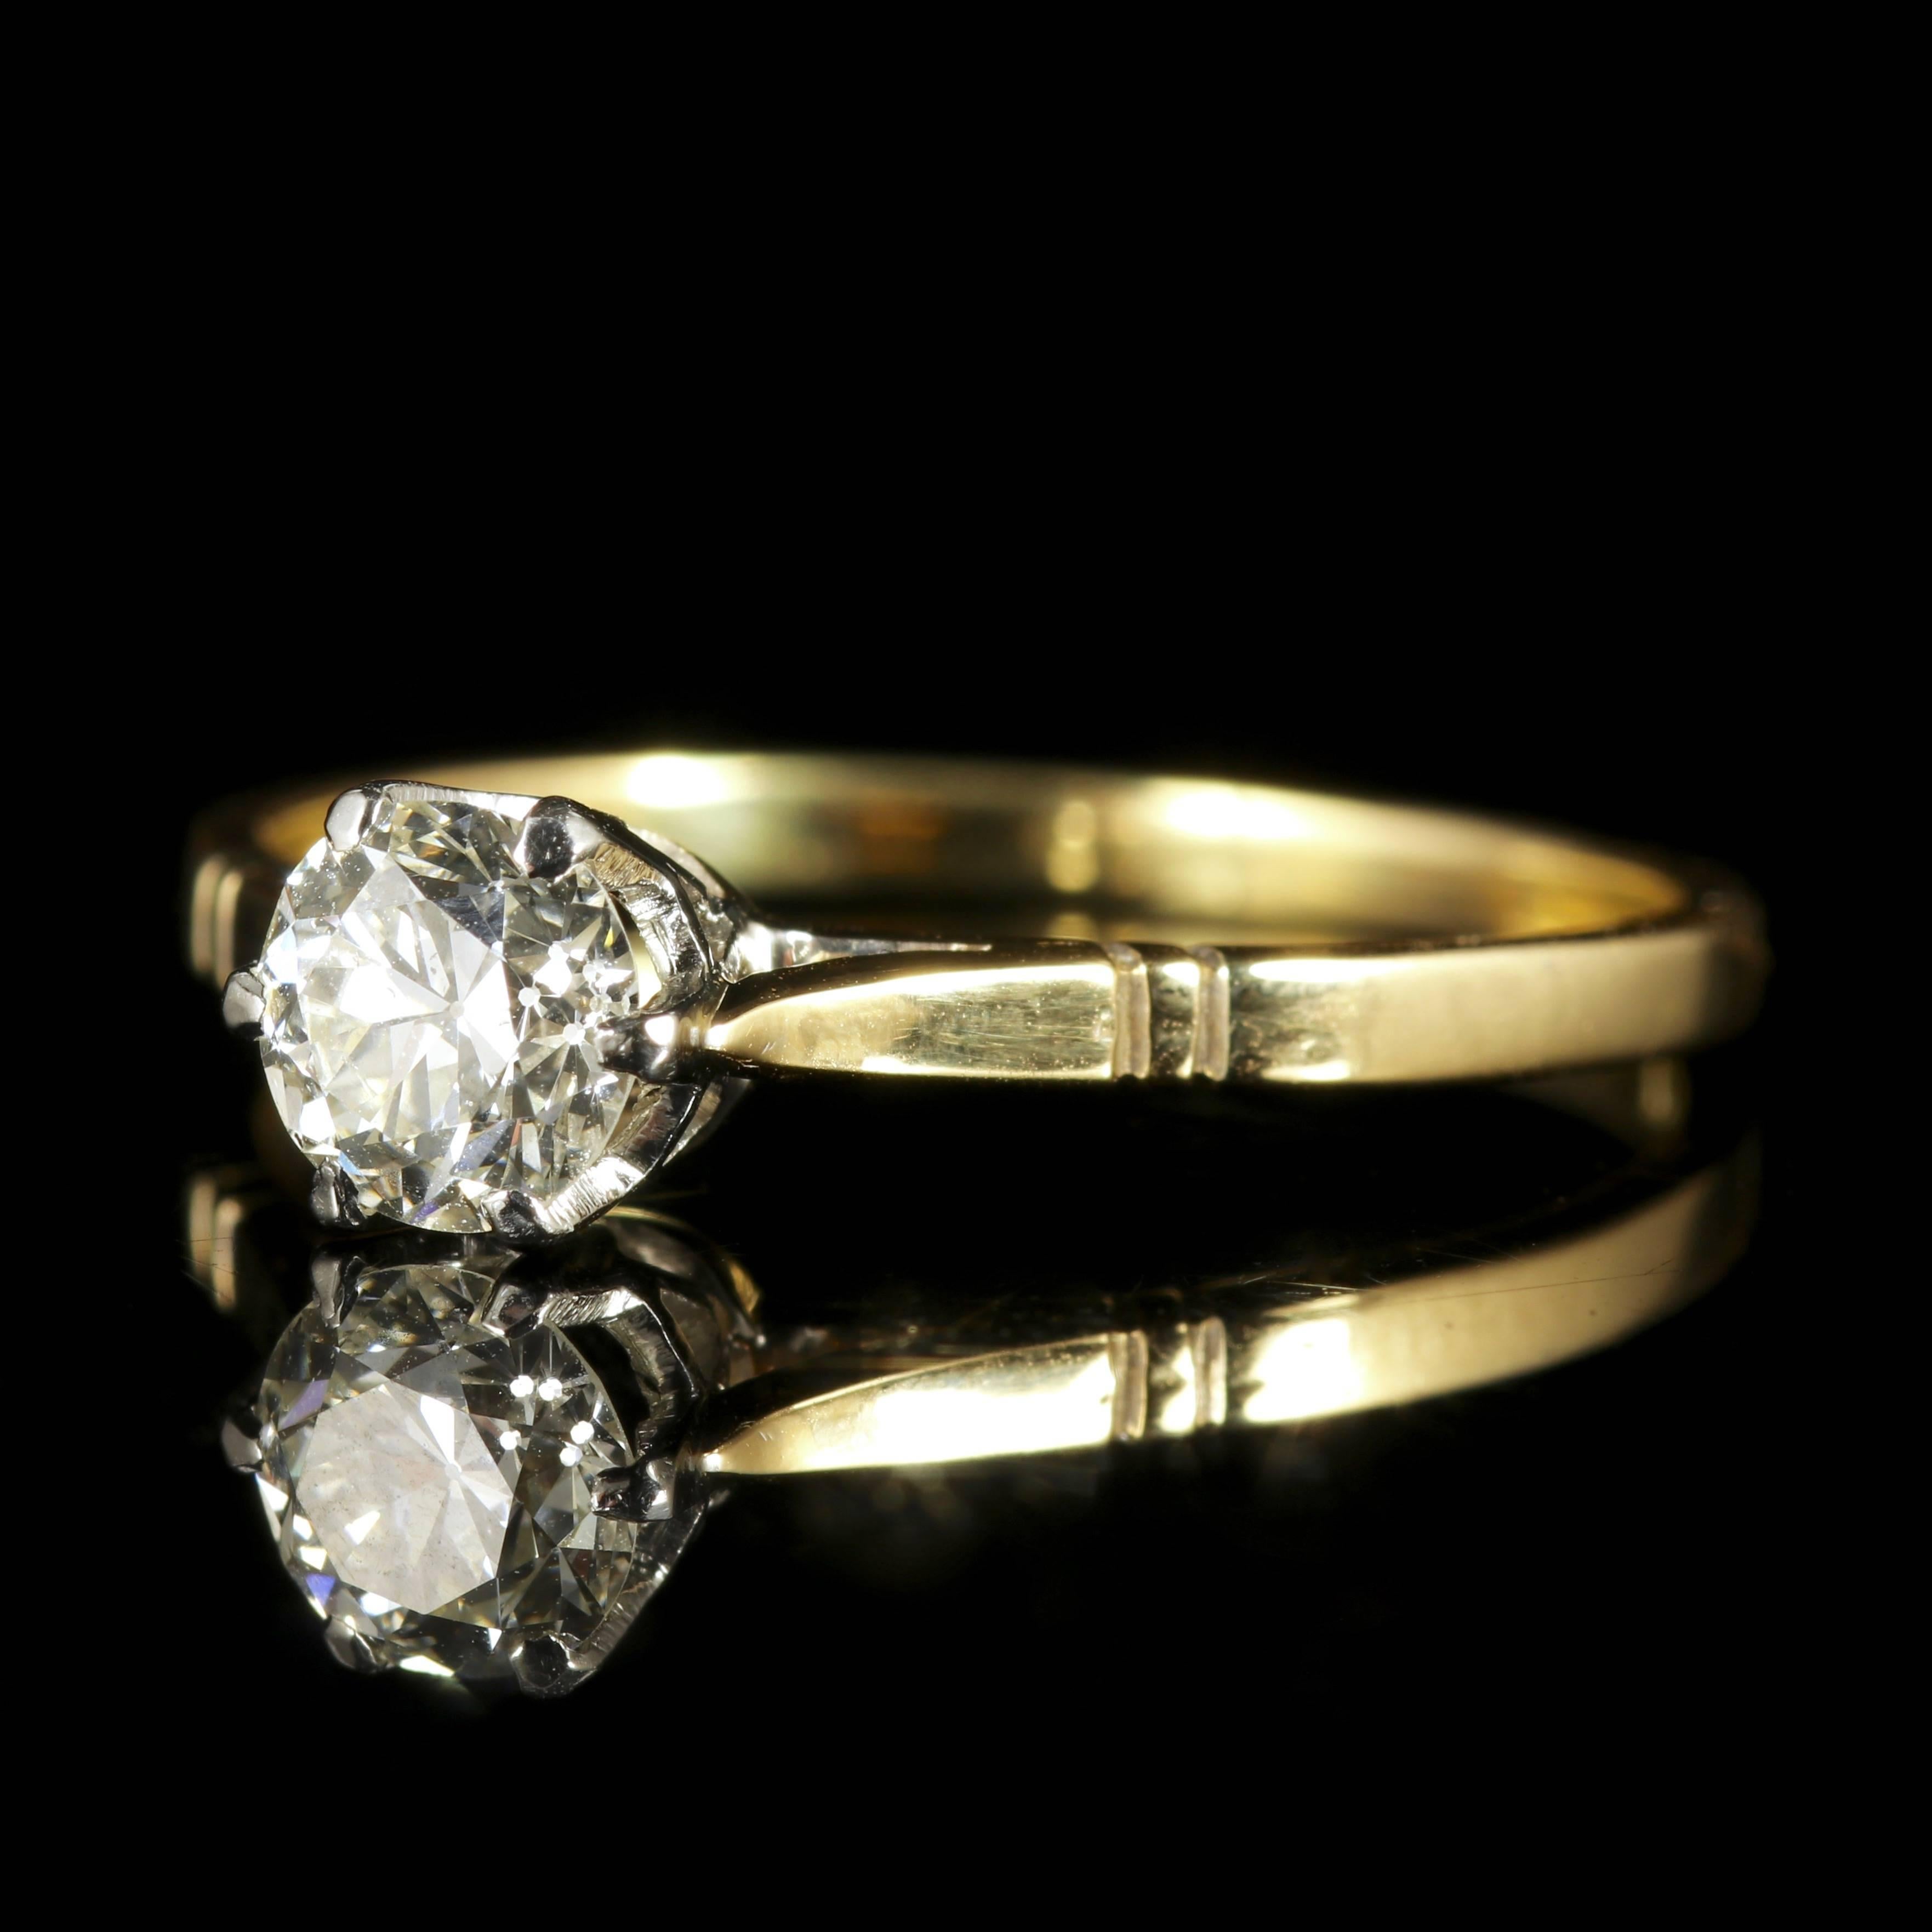 This genuine antique Edwardian solitaire Diamond ring is Circa 1915.

The lovely ring is set in 18ct Yellow Gold and Platinum,  hallmarked PLAT 18CT. 

The central Diamond is 0.65ct in size.

Diamond is the hardest mineral on Earth and this combined